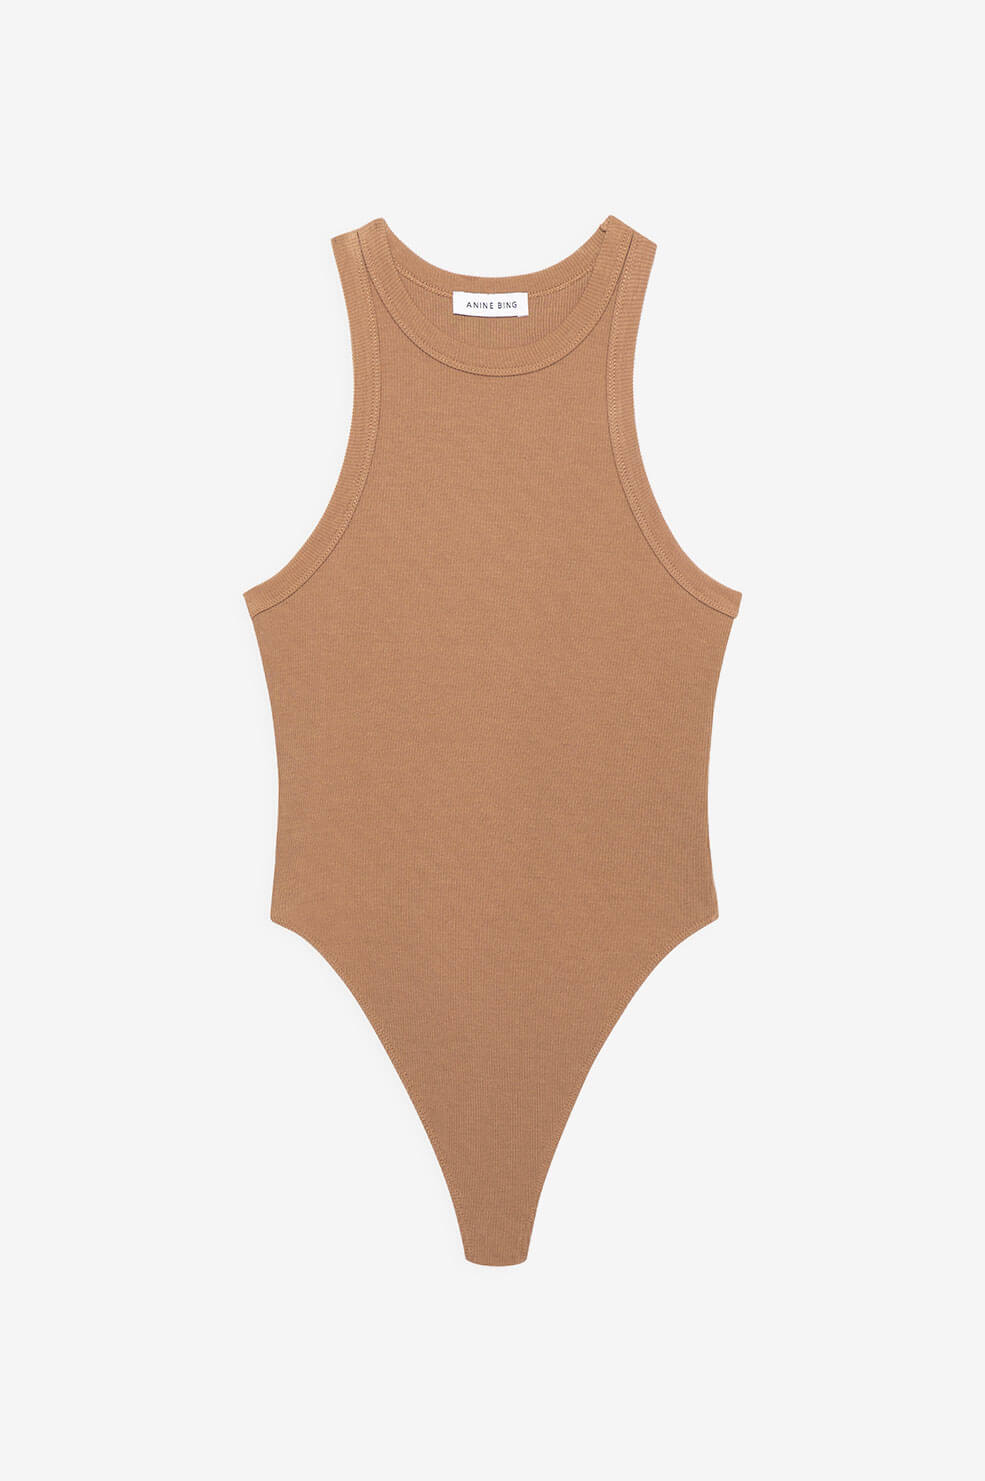 ANINE BING Ty Bodysuit - Camel - Front View